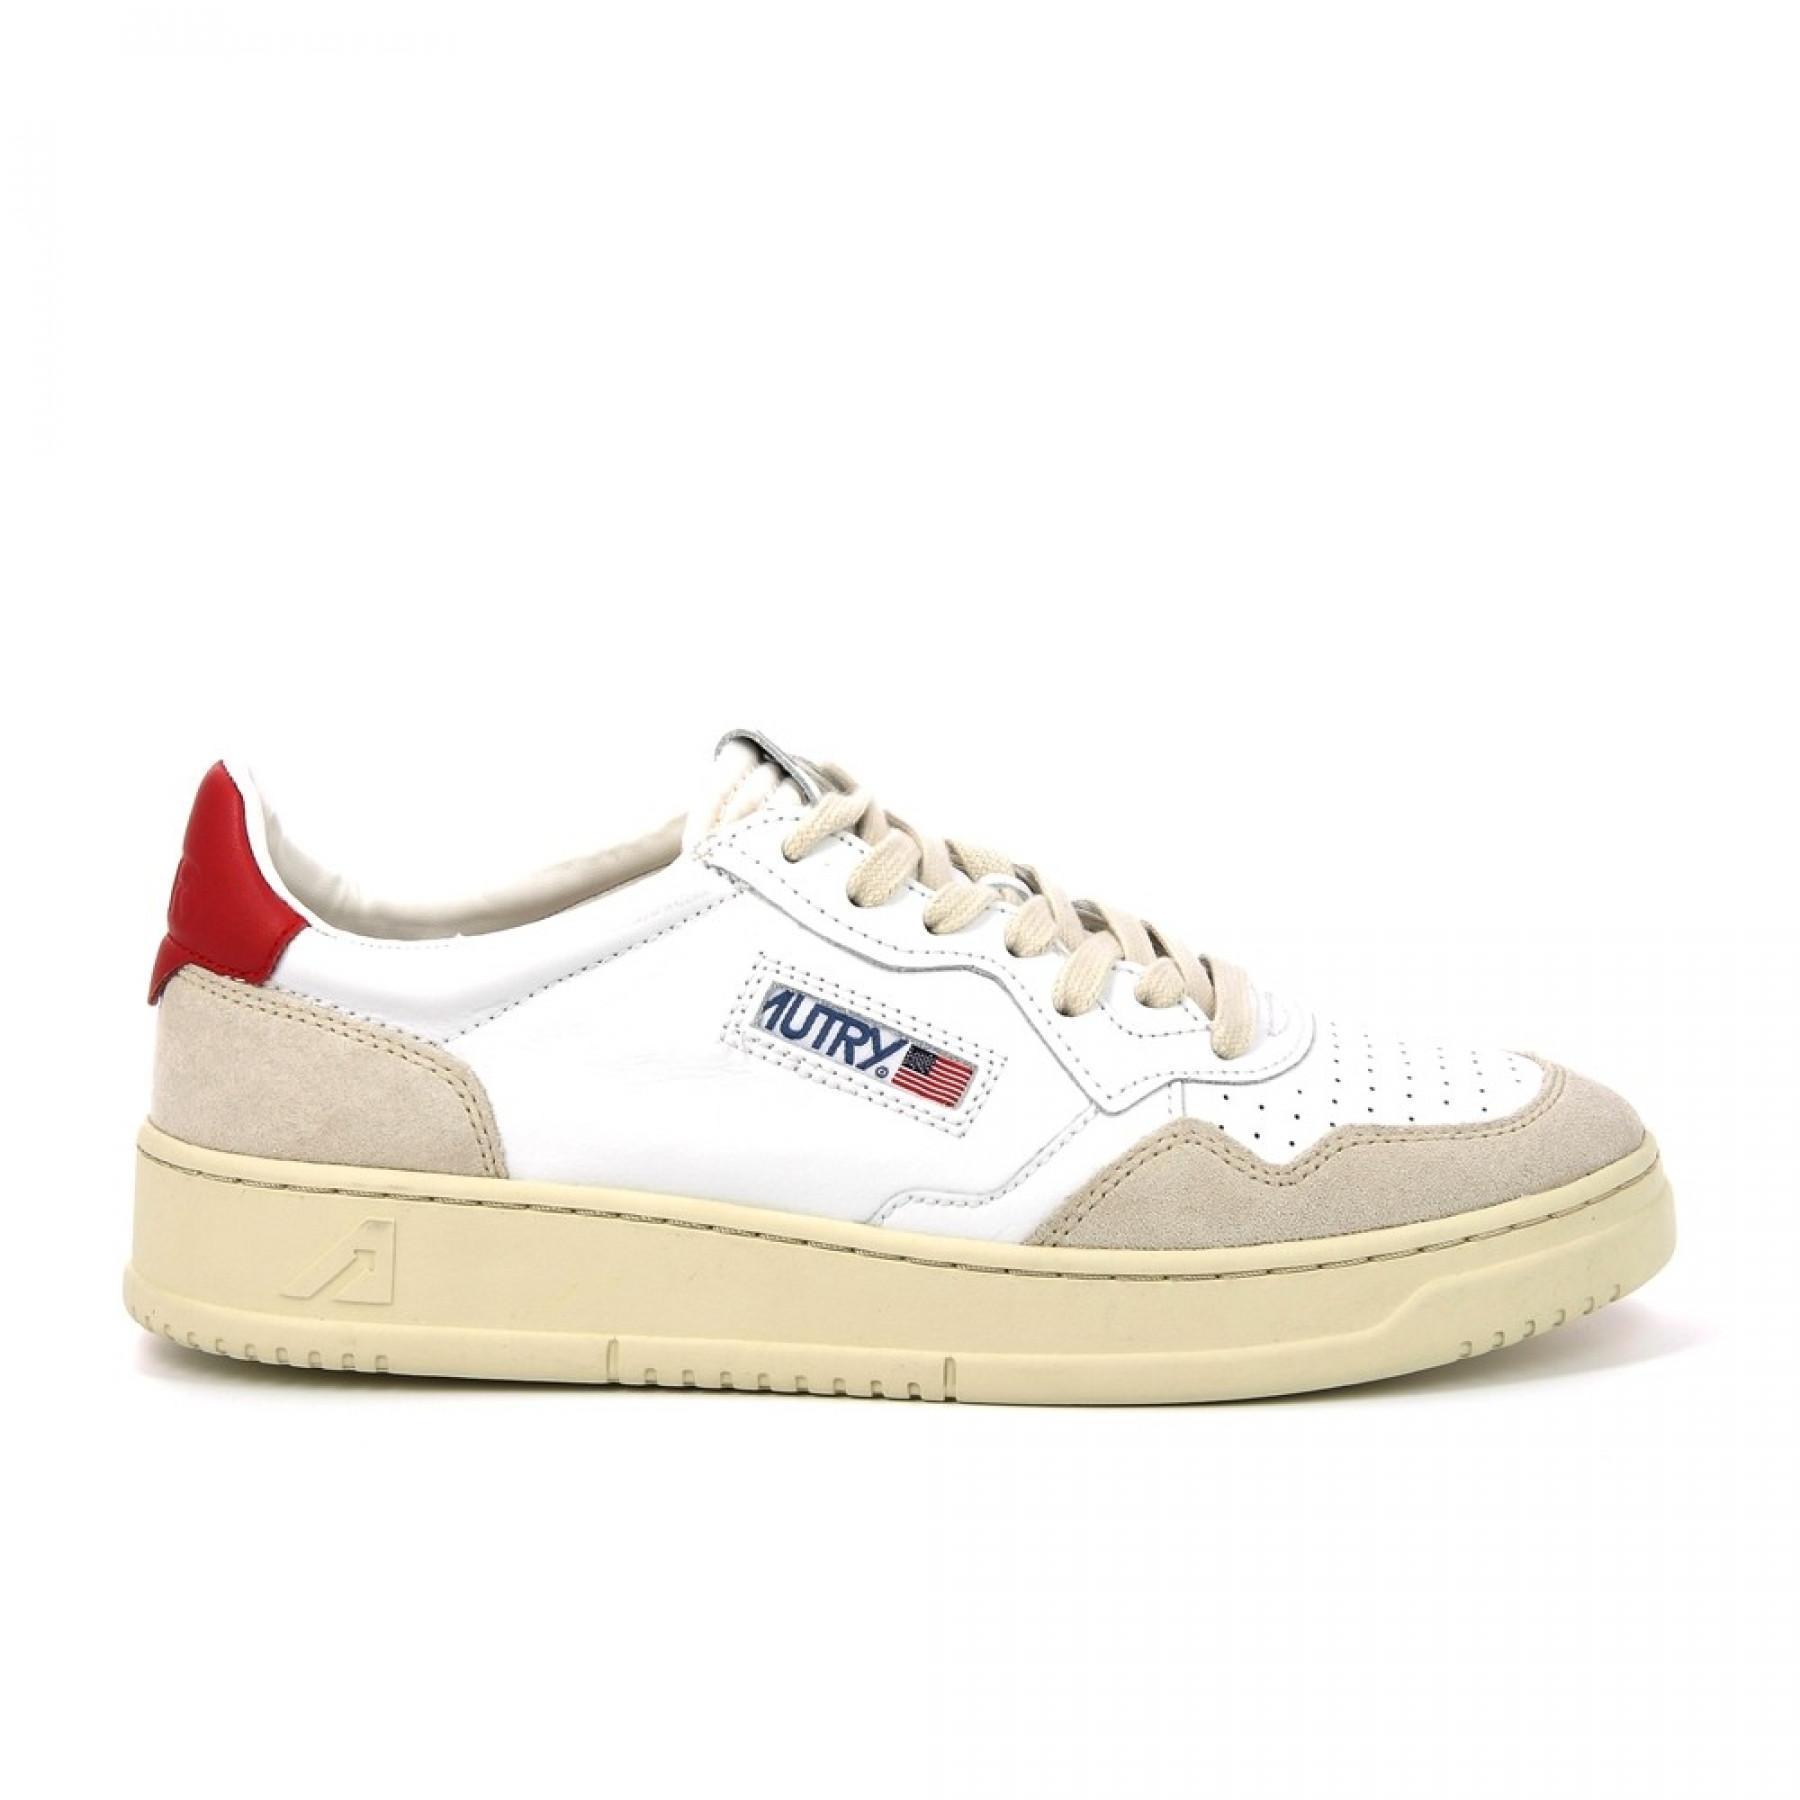 Baskets Autry Medalist LS24 Leather/Suede White Red